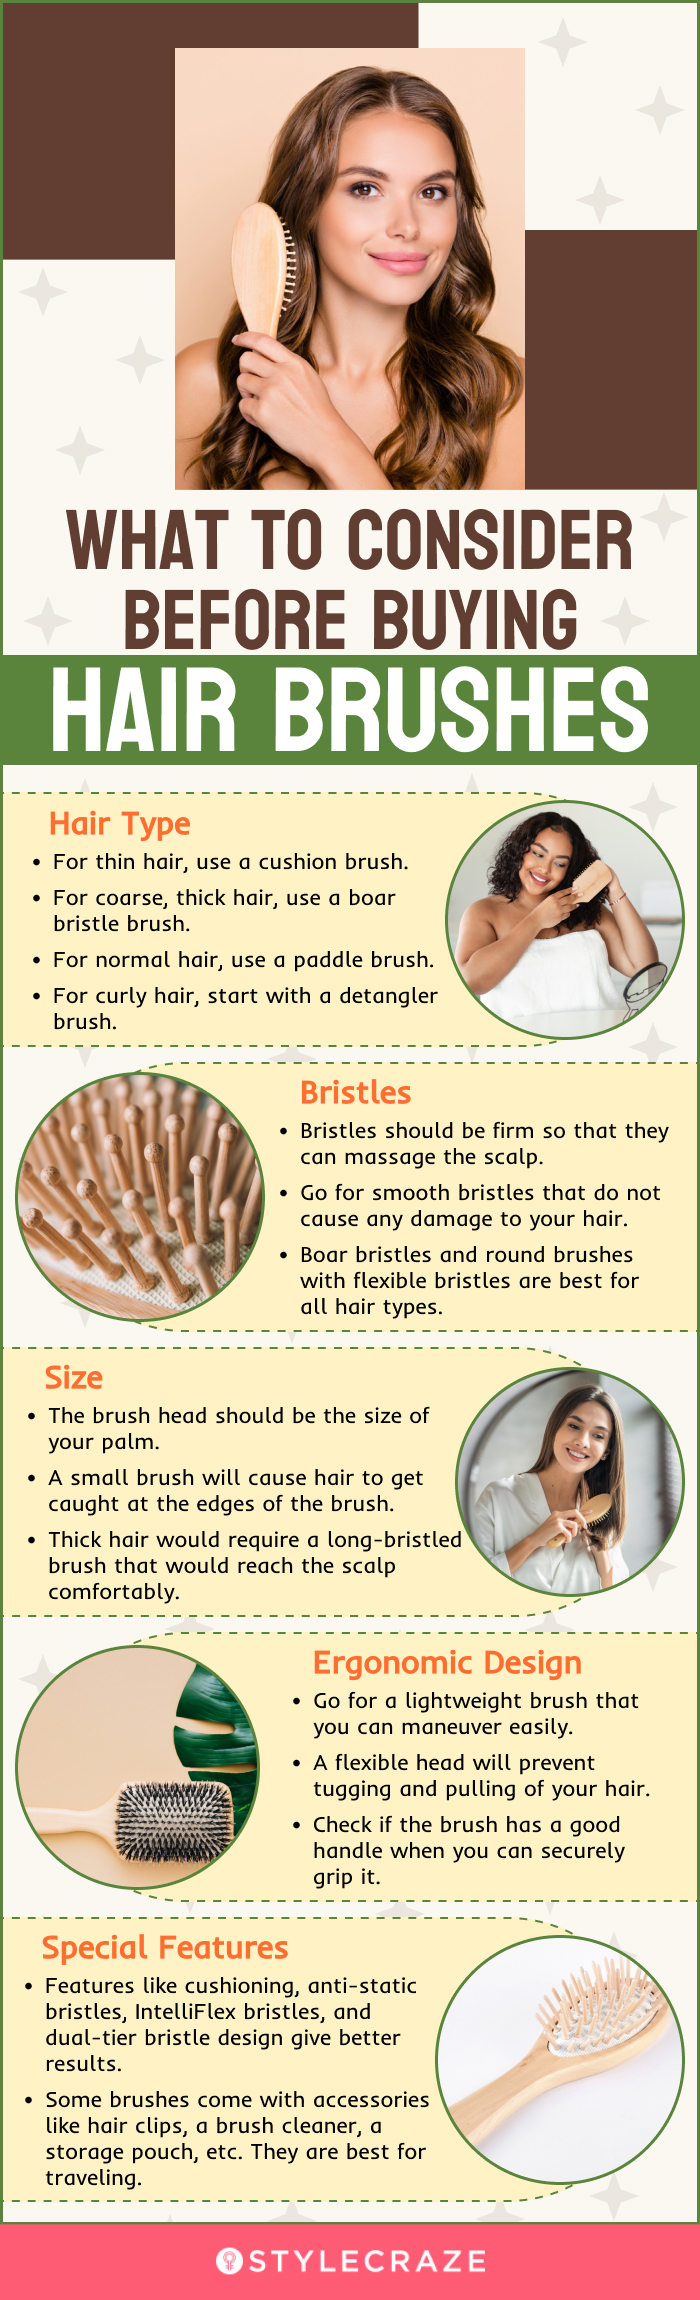 What To Consider Before Buying Hair Brushes (infographic)